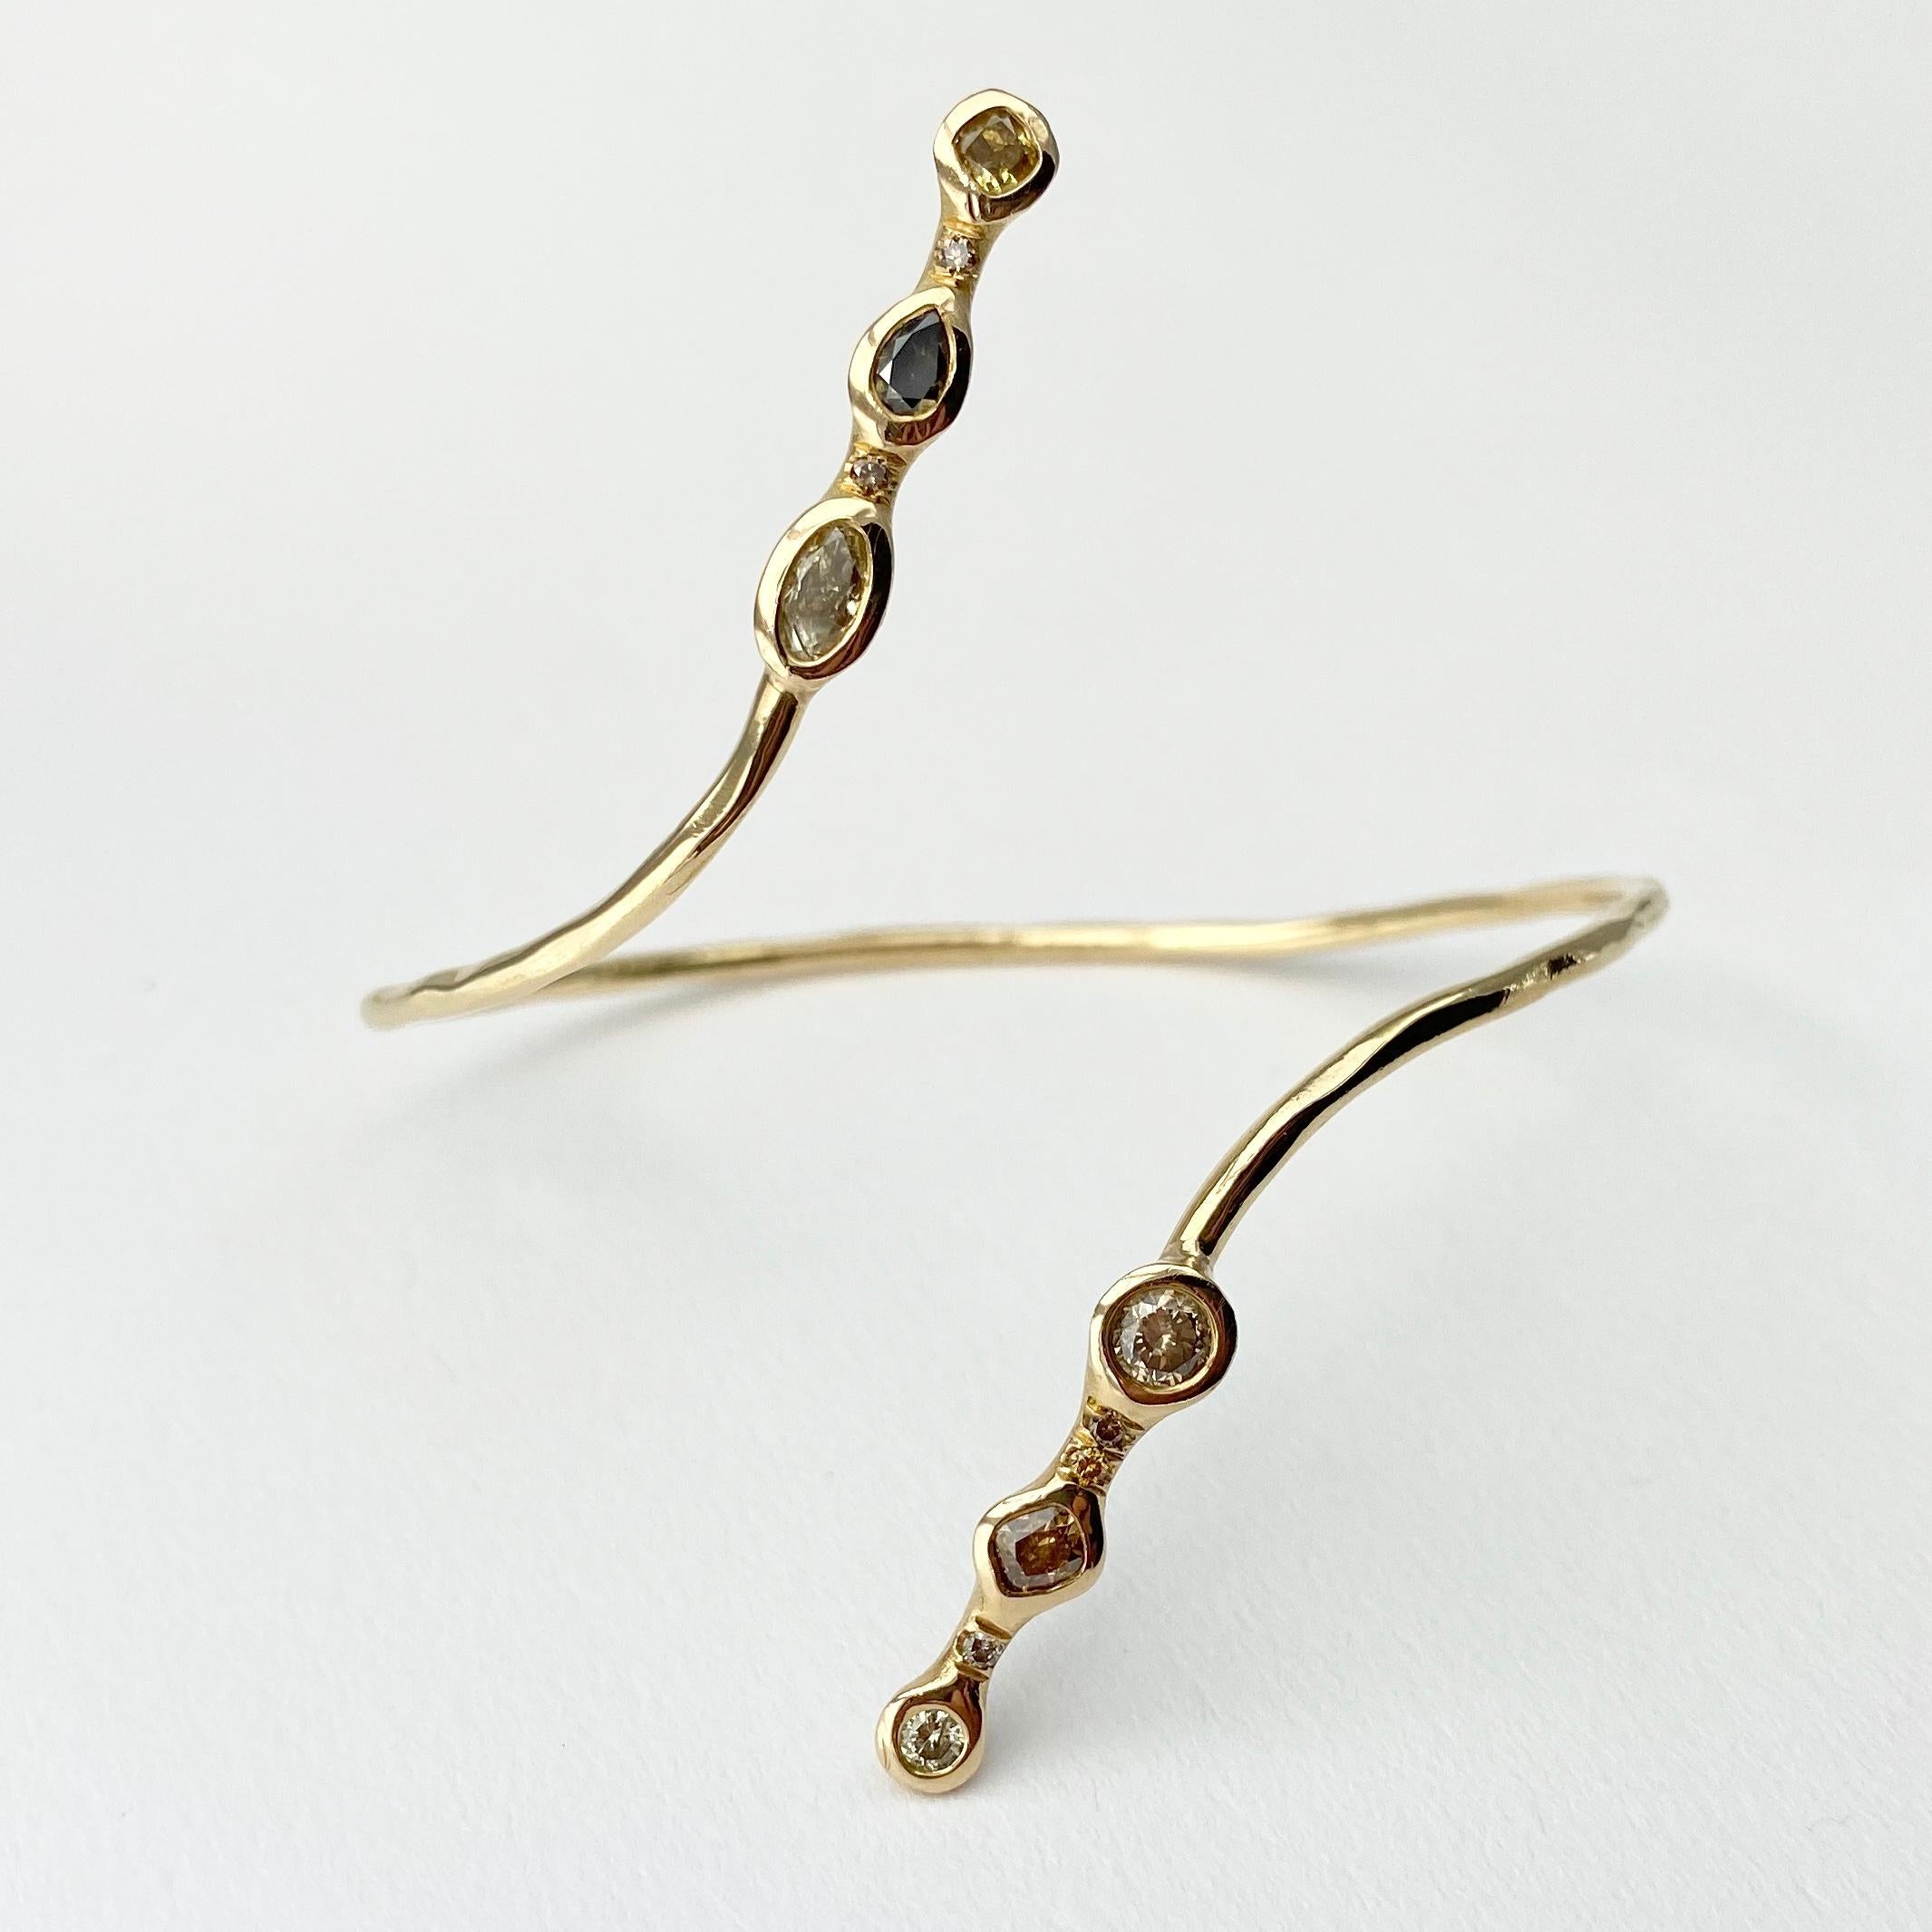 The Meander bracelet, form our Barefoot Collection, is hand-made with 18-karat recycled yellow gold, and features six bezel set, colored diamonds (two cushion shape, two round, one pear, and one oval); and five round, champagne accent diamonds. This